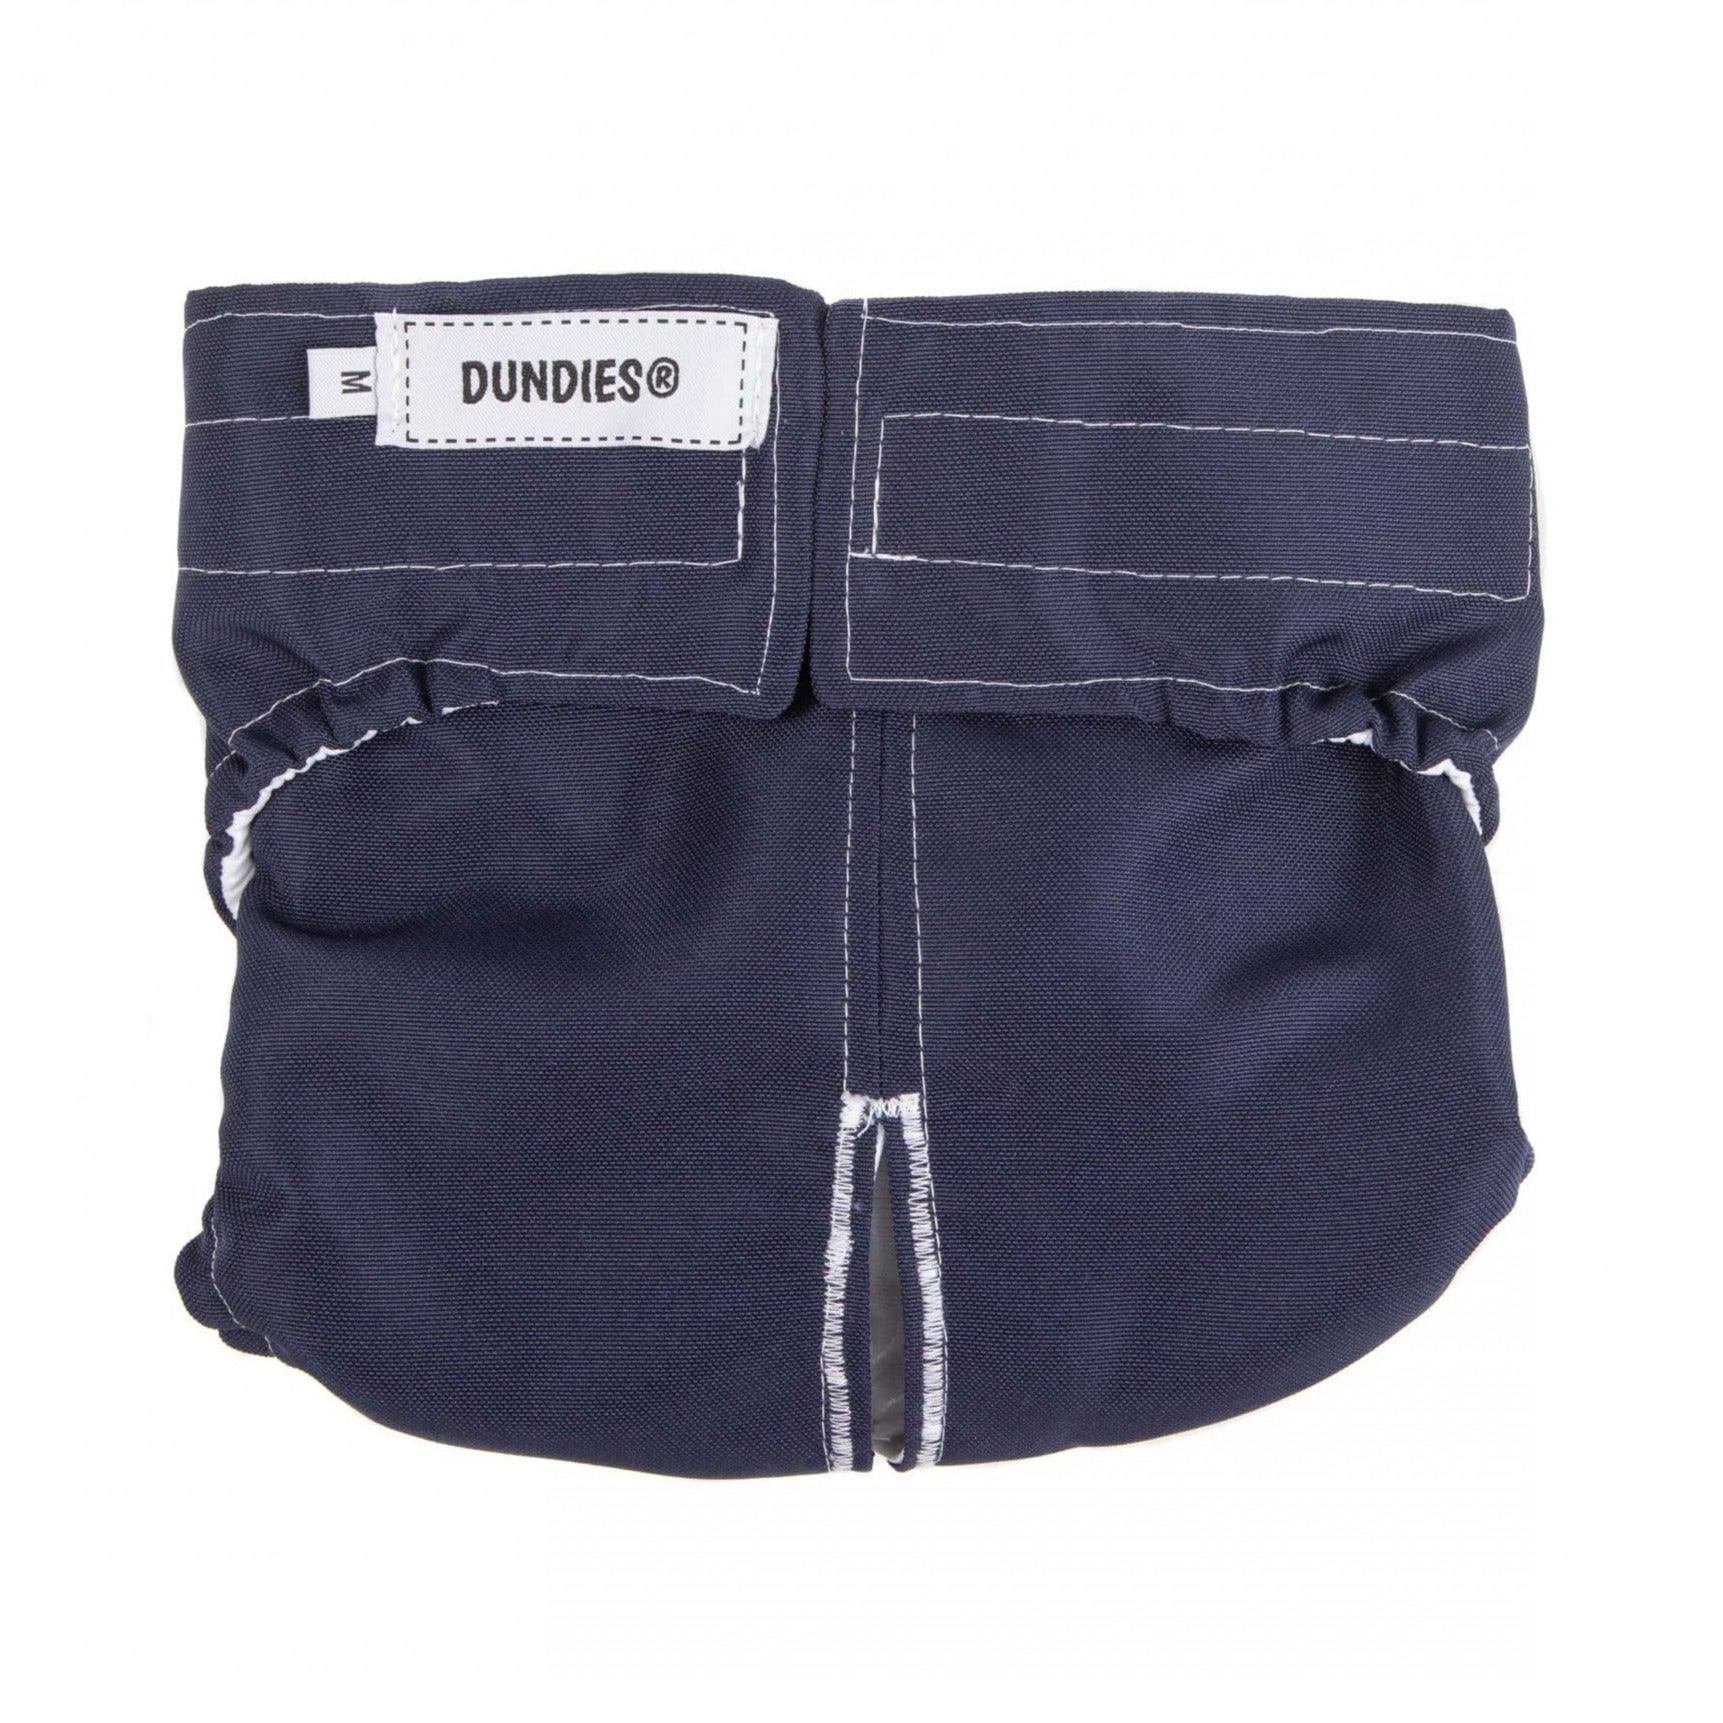 Dundies Navy Snappie-Dundies Australia - Vet Recommended Pet Nappies